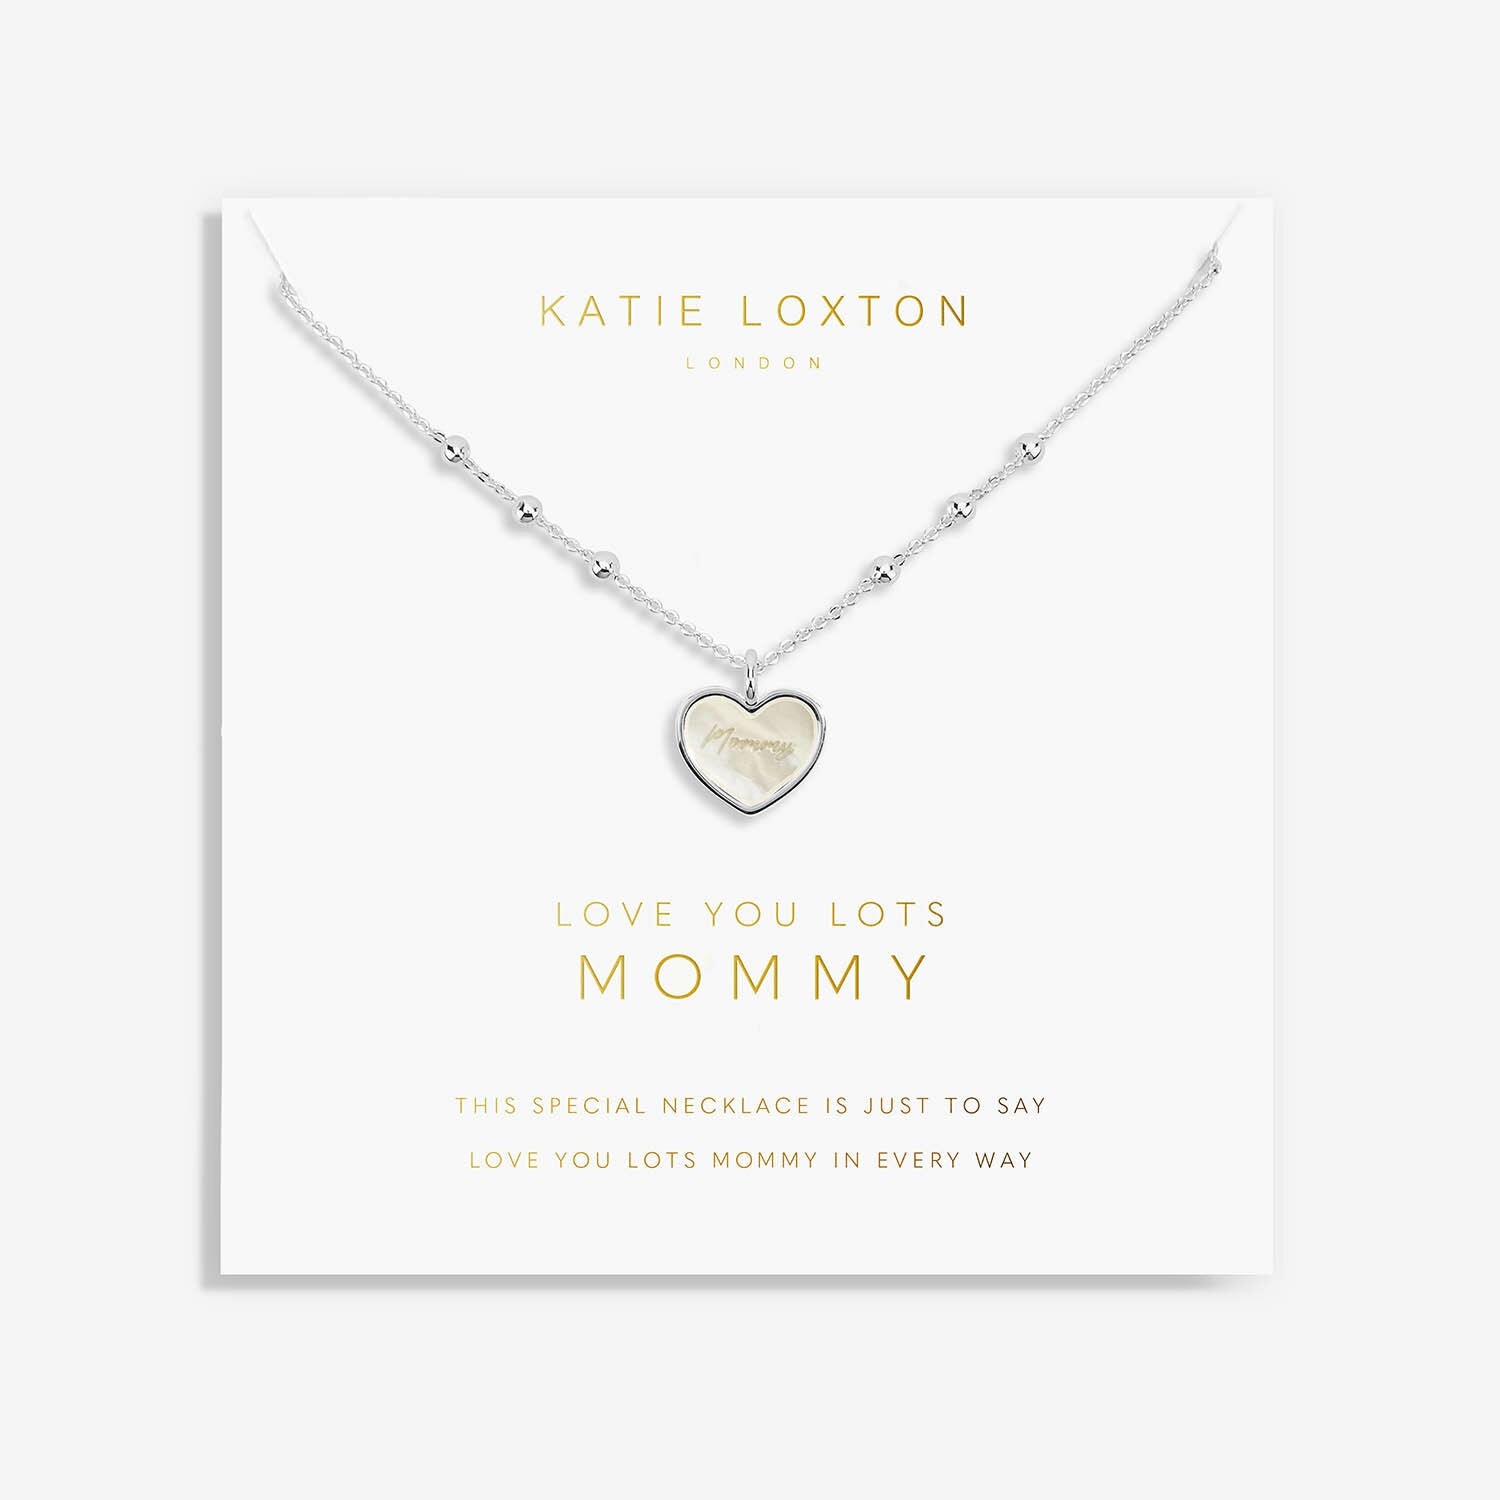 My Moments "Love You Lots Mommy" Necklace